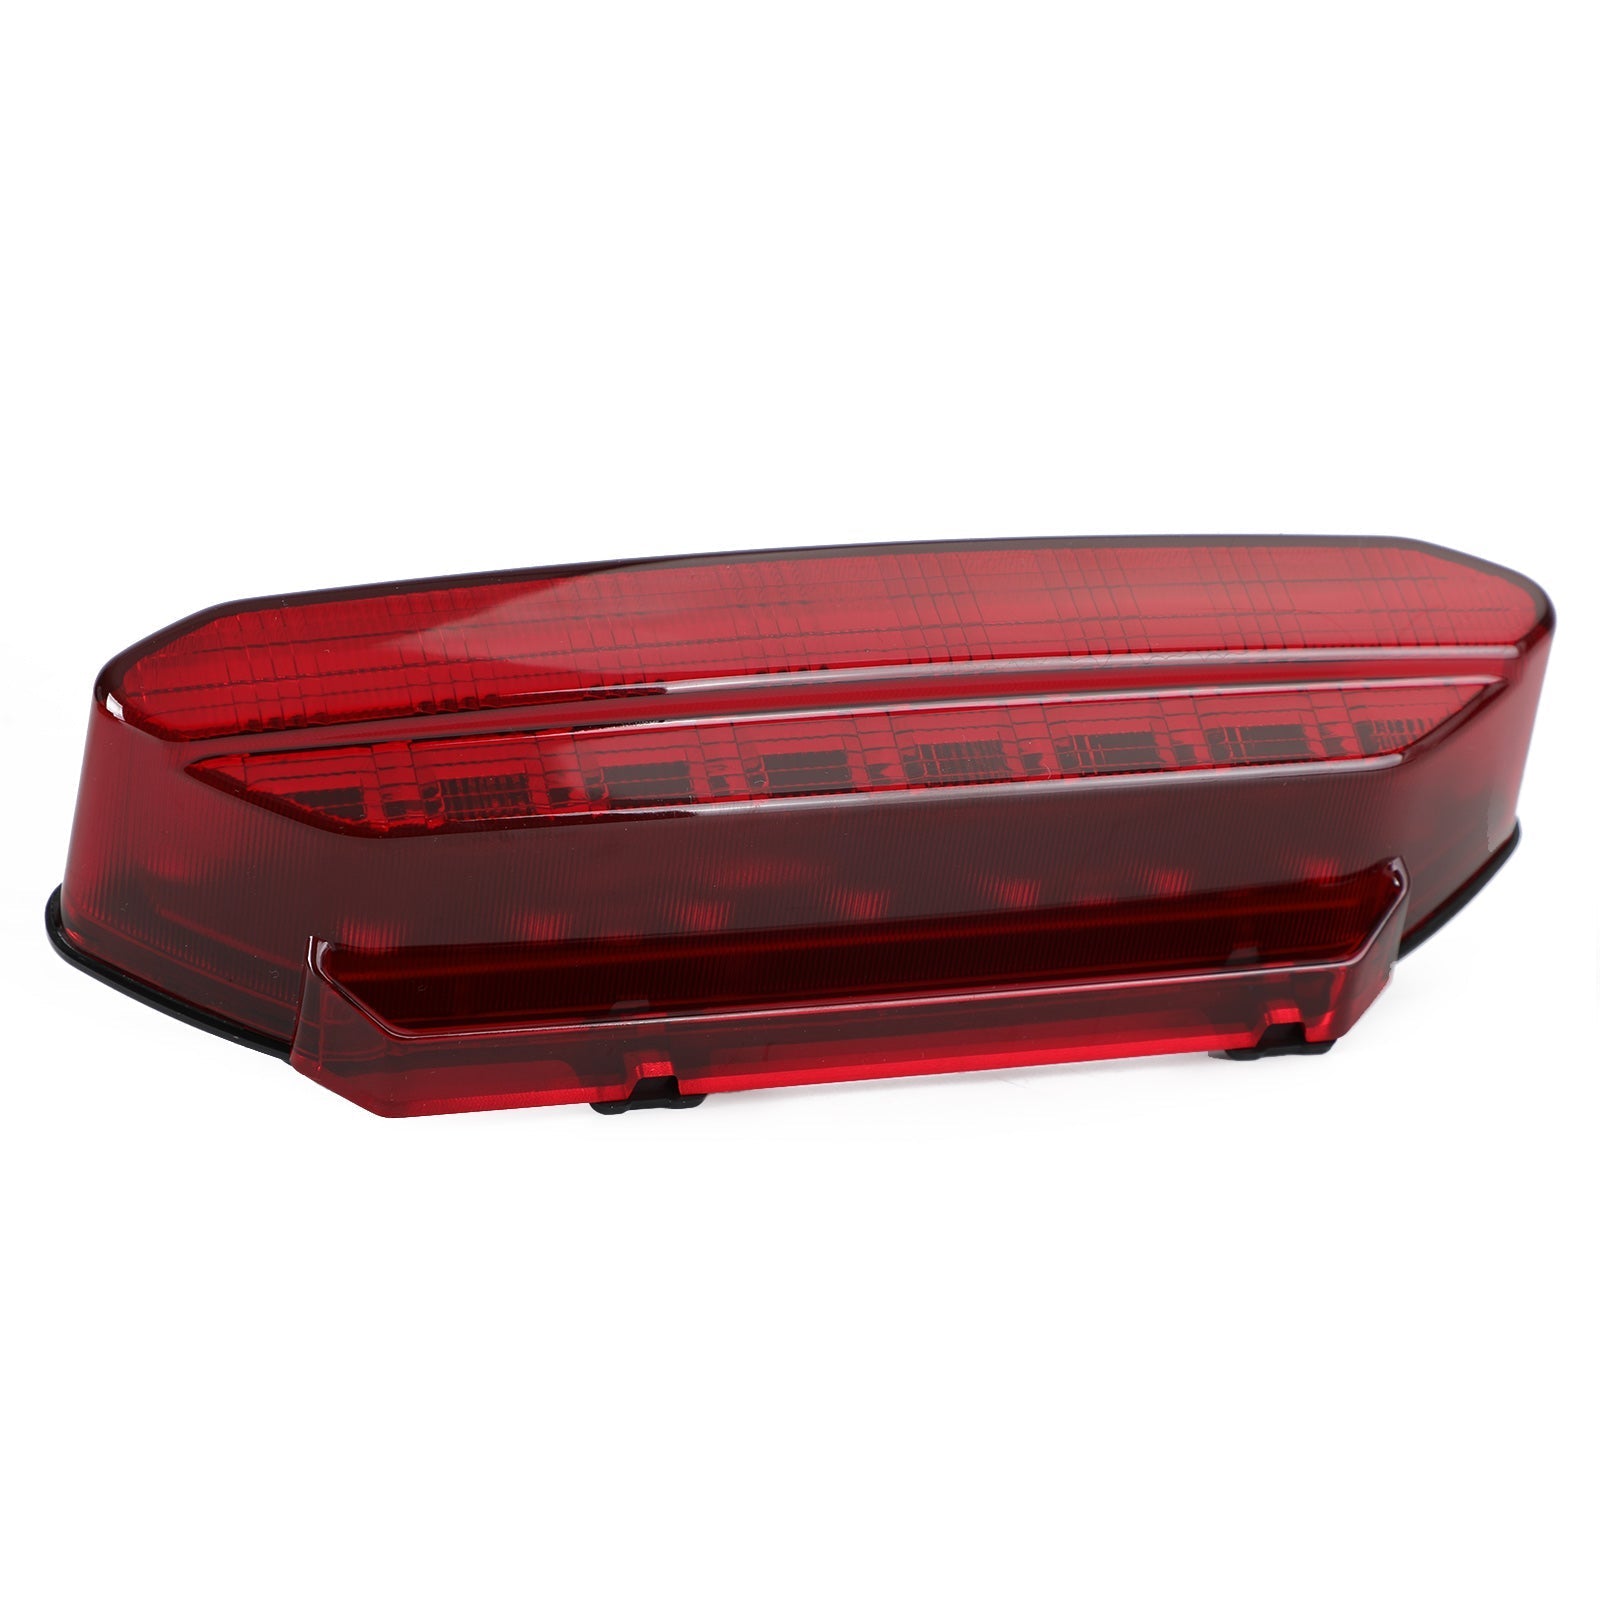 YAMAHA YFZ450 YFZ 450 2006-2009 5TG-84710-21-00 Fanale posteriore a LED Fanale posteriore